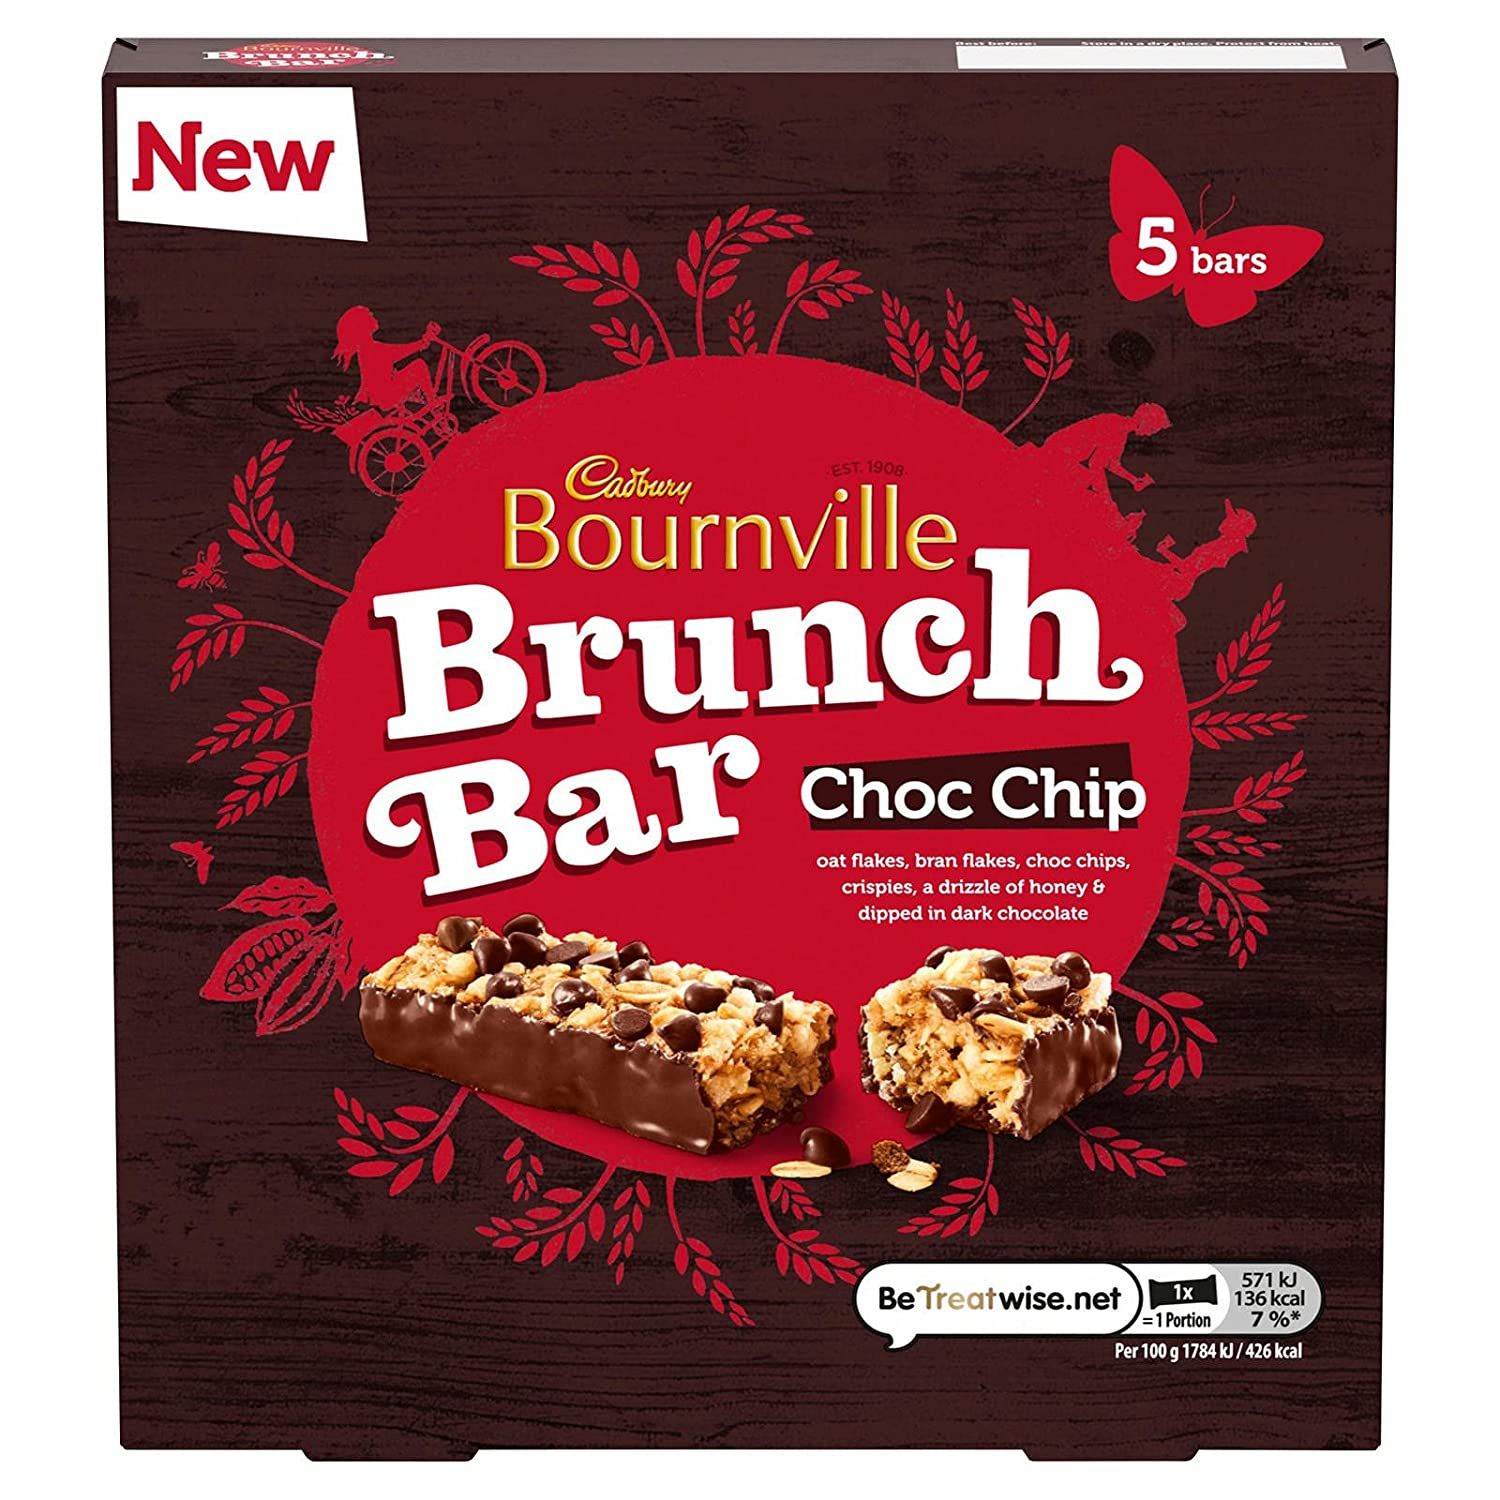 Cadbury Bournville Brunch Bar Choco Chips Cereal Bars Image